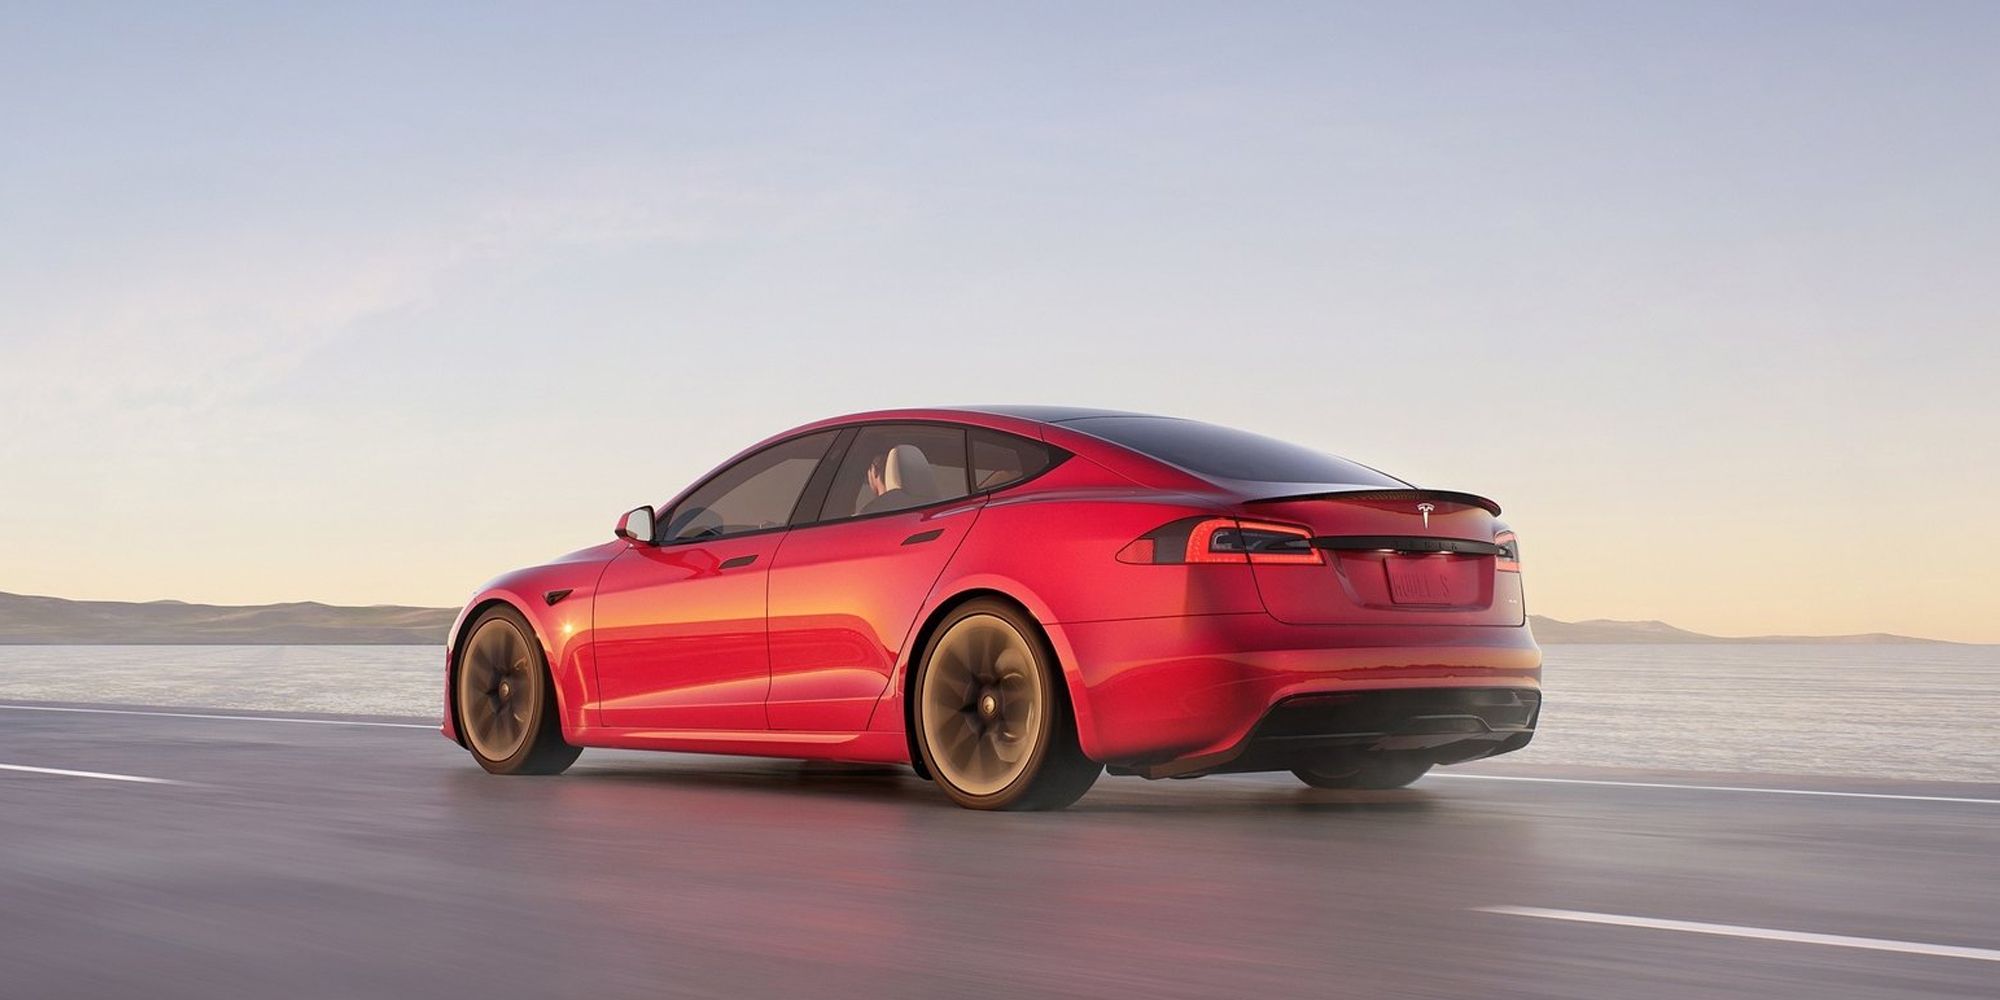 Rear 3/4 view of a red Model S Plaid in motion